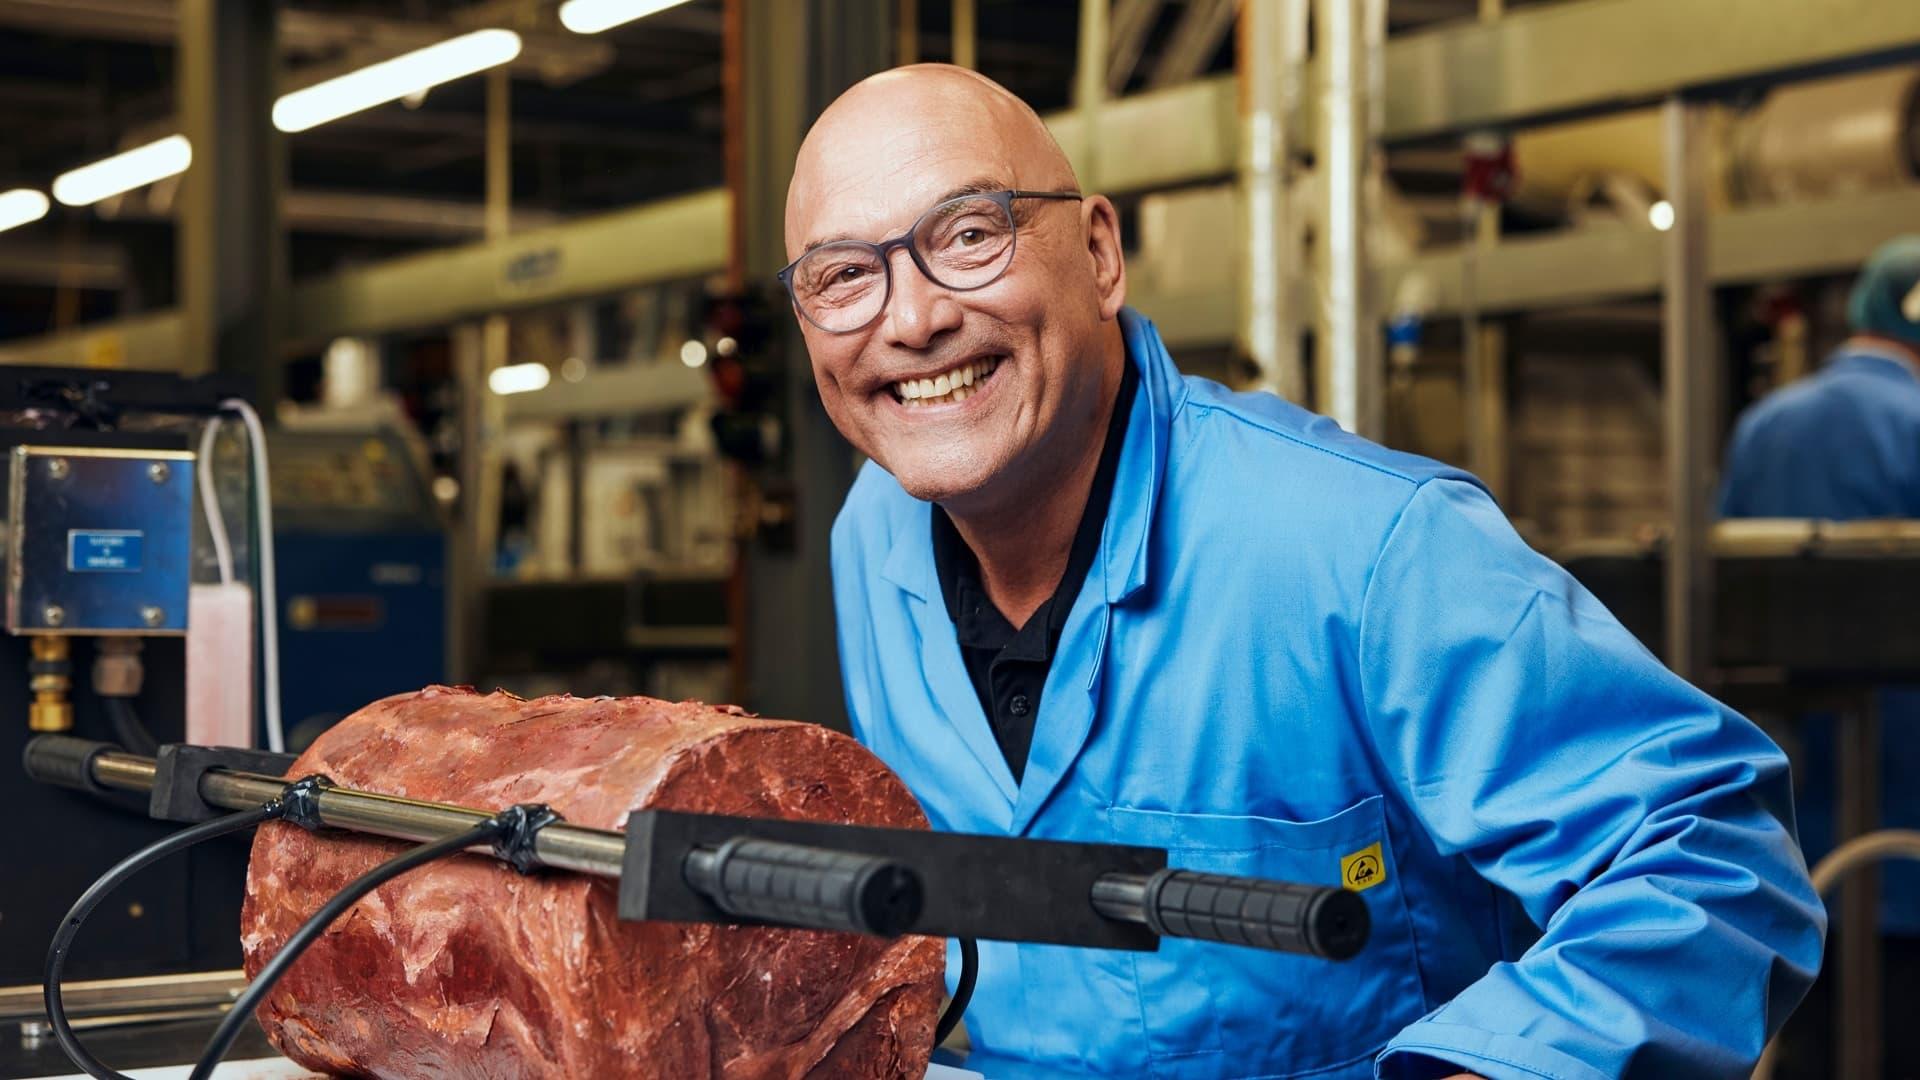 Gregg Wallace: The British Miracle Meat backdrop